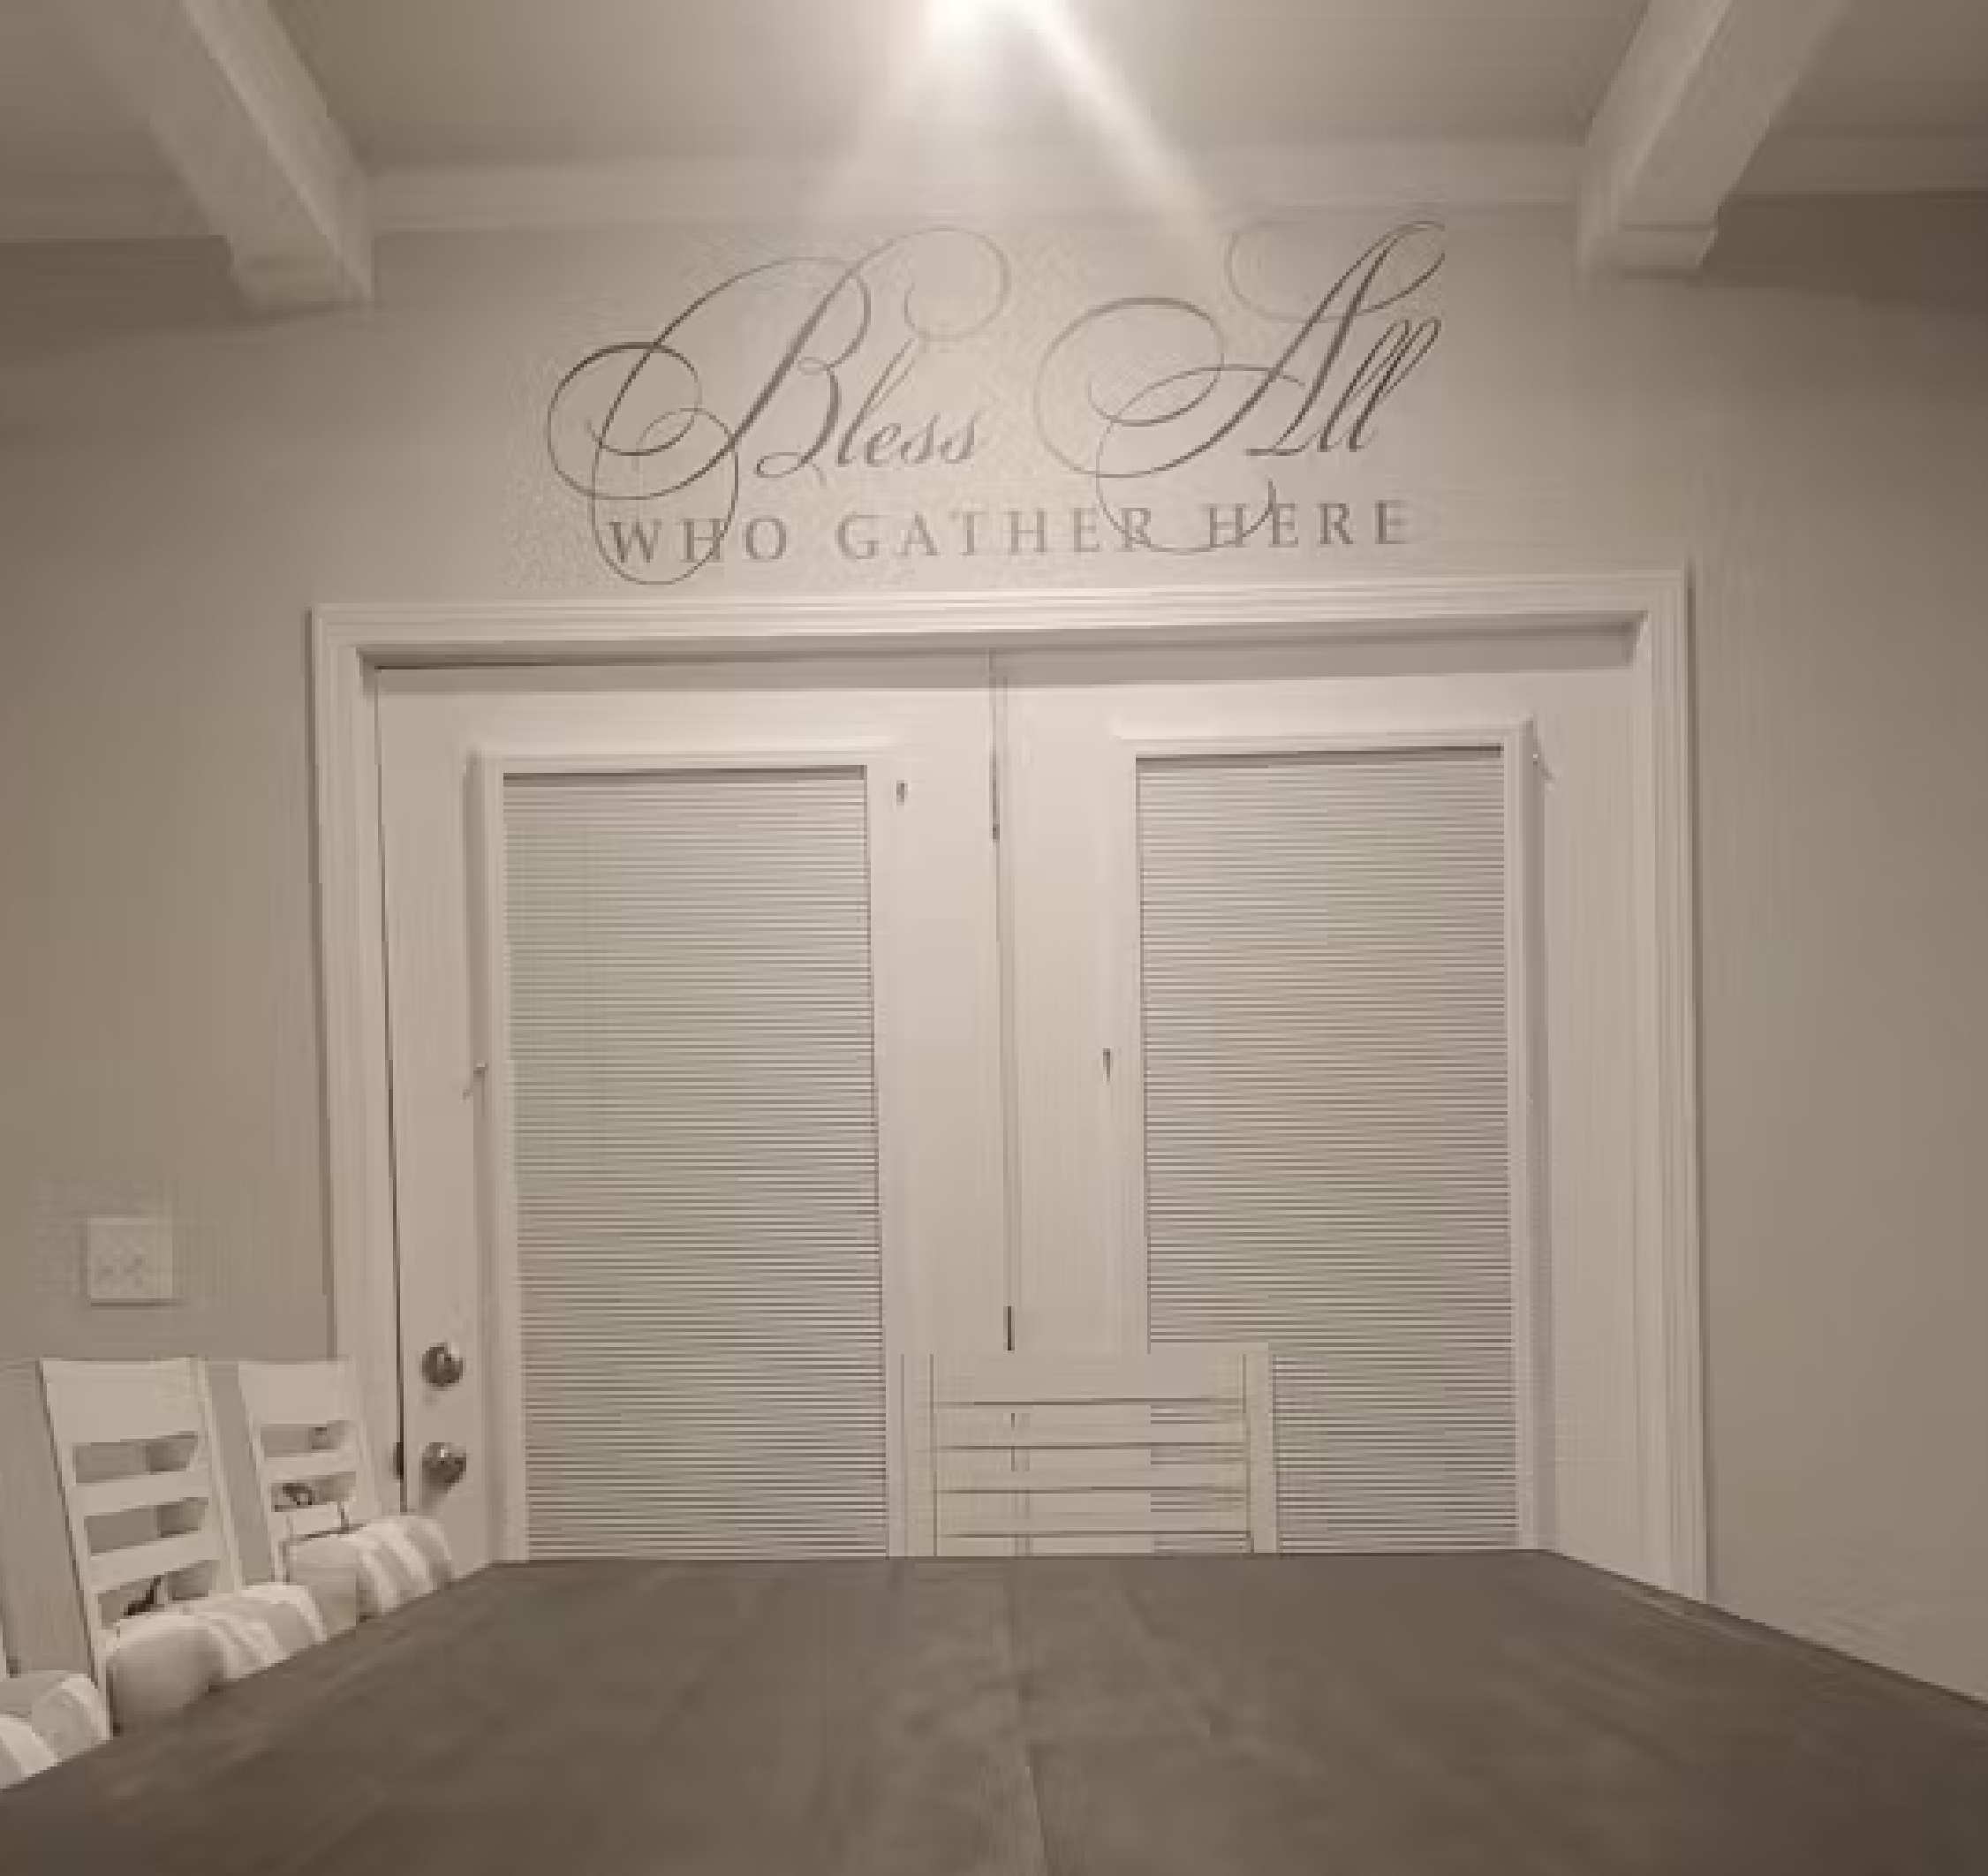 A picture of a customers dining room with their Simple Stencil wall decal displayed over the table that reads: Bless all who gather here in a beautiful way. By TheSimpleStencil.com